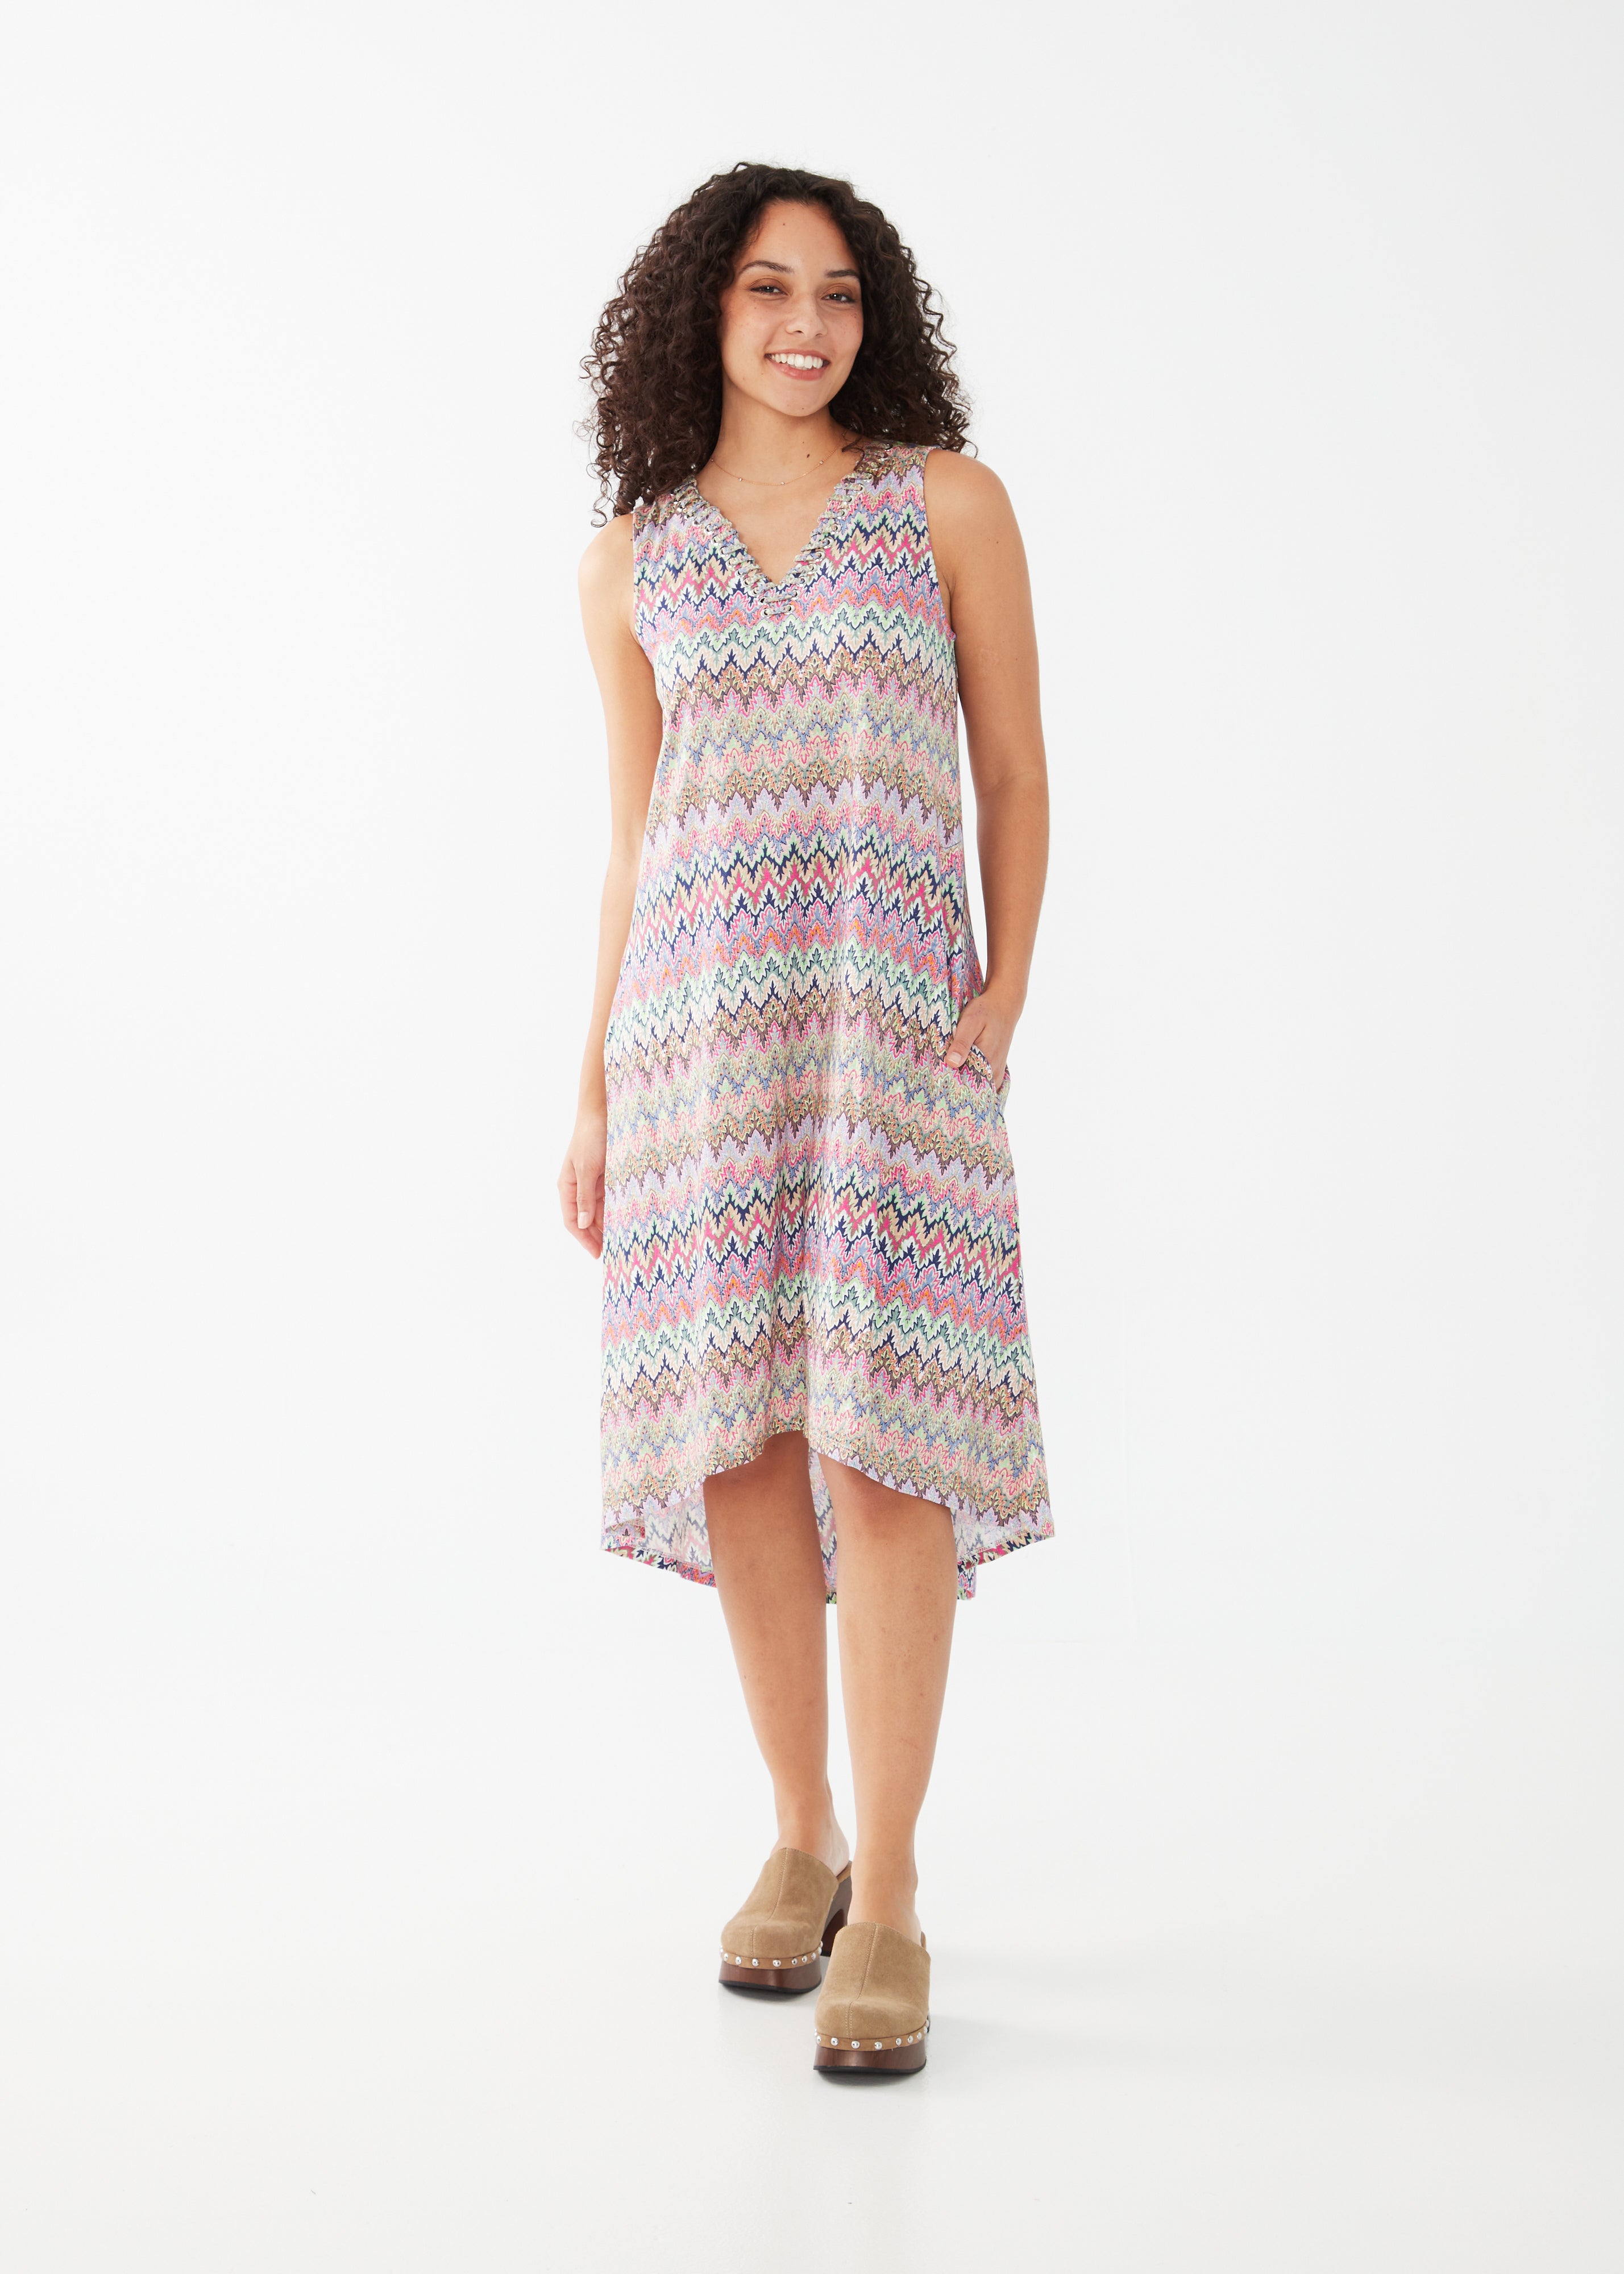 Get ready to turn heads in our FDJ Lace Up Detail Dress! Featuring a faux crochet stripe design and a playful mix of multi-colour, this dress is the perfect combination of style and comfort. Rock this dress and make a statement wherever you go! (Warning: may cause outfit envy)